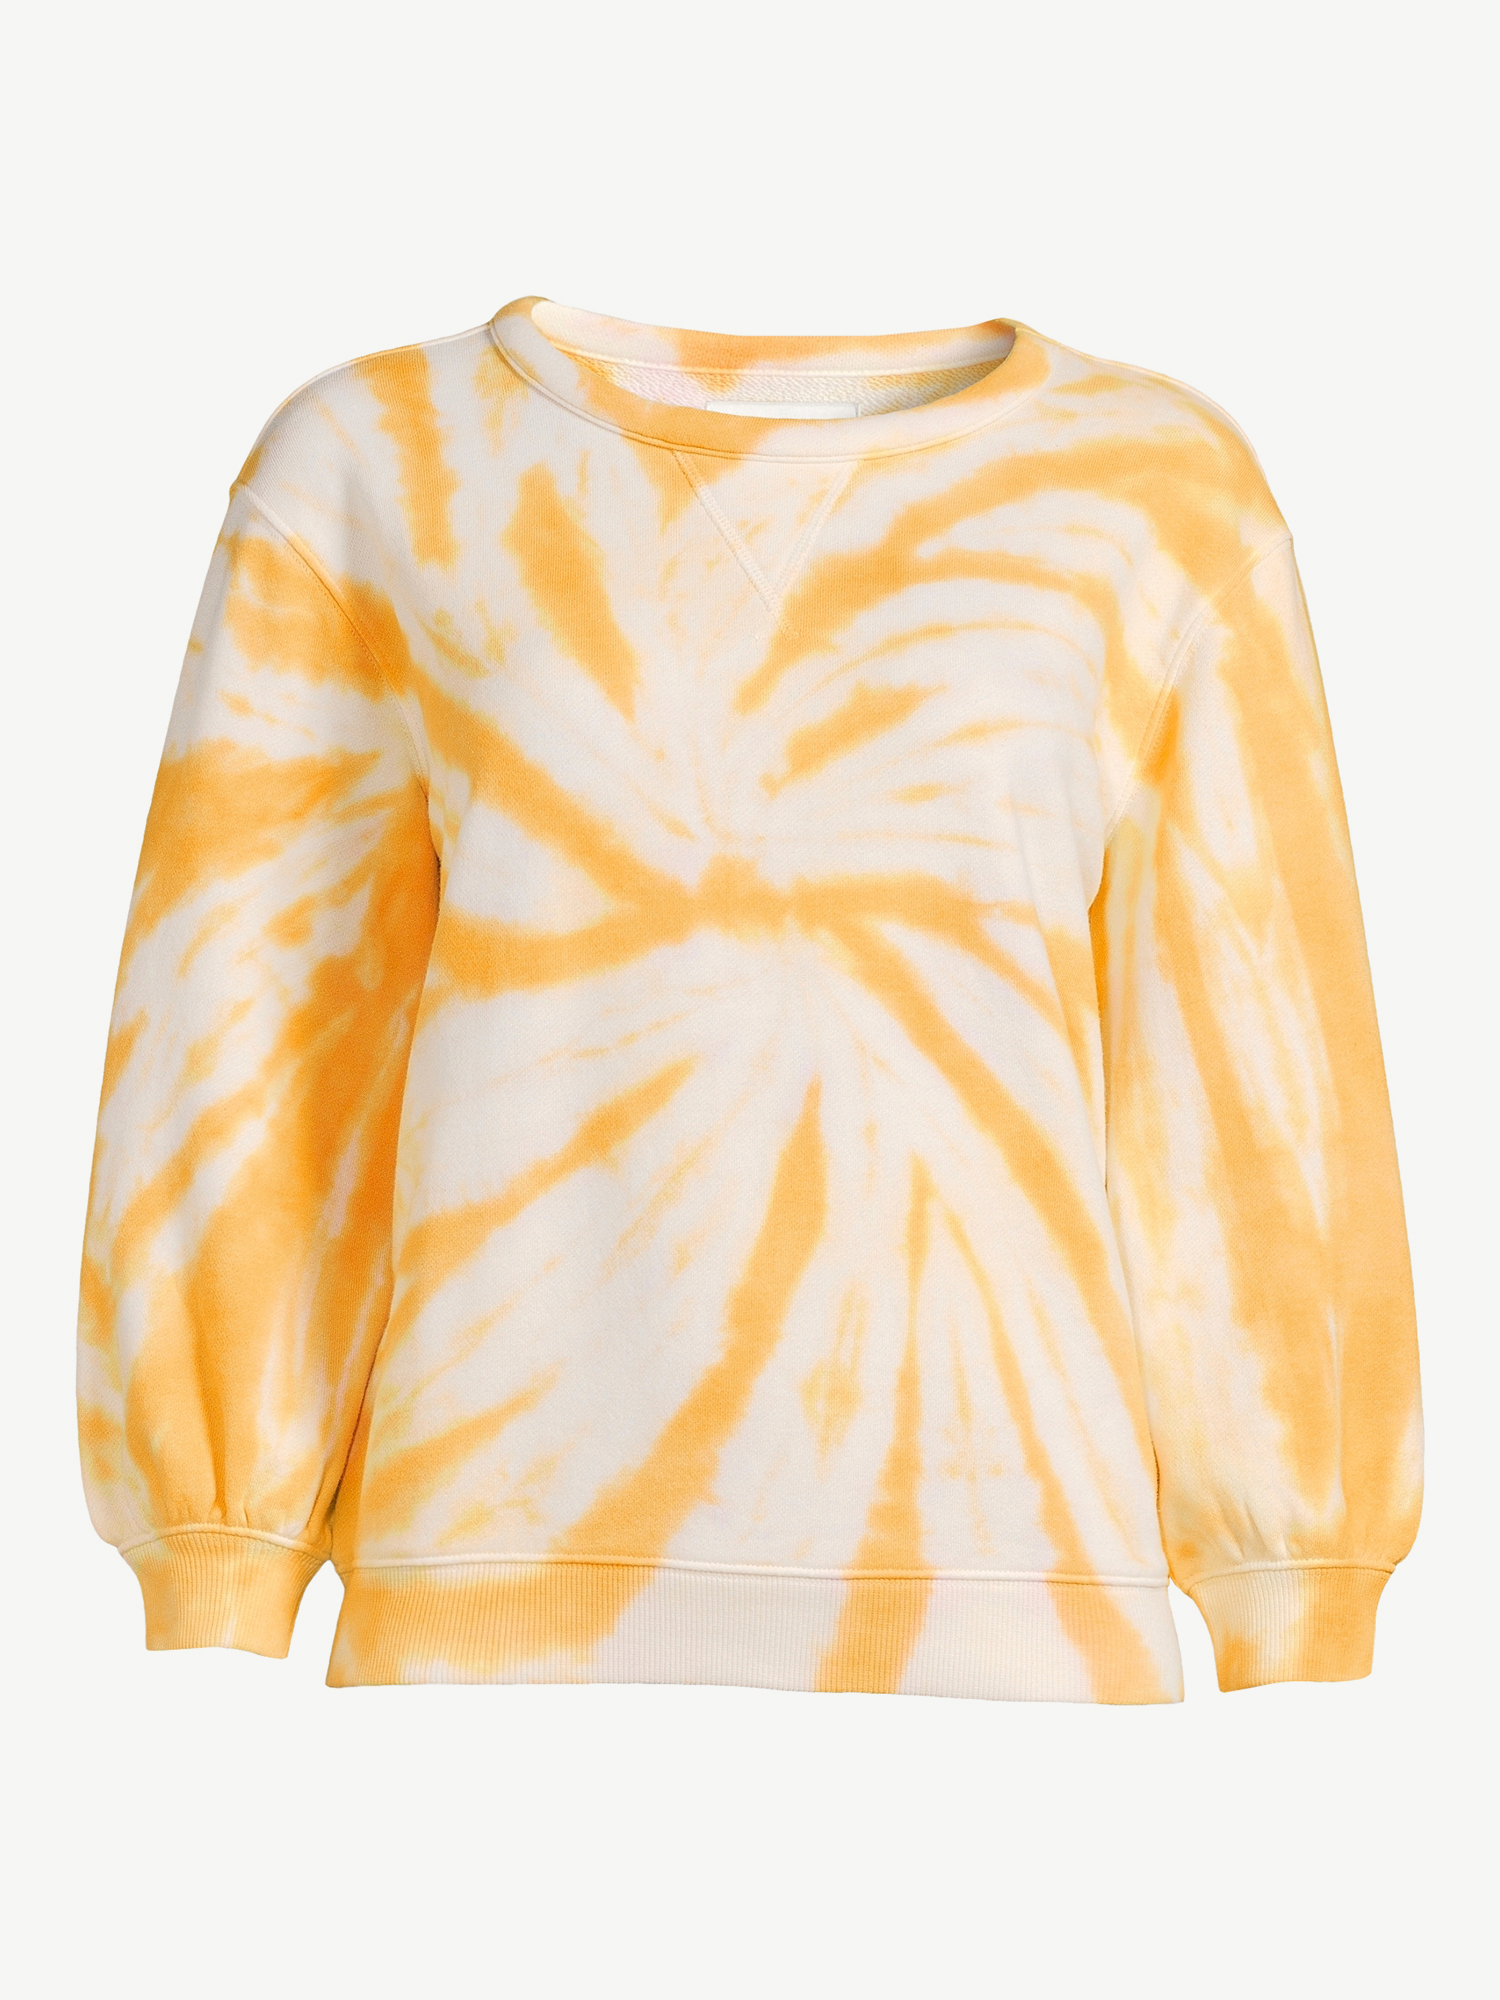 Free Assembly 3/4 Sleeve Pullover Regular Sweatshirt (Women's) 1 Pack - image 3 of 7